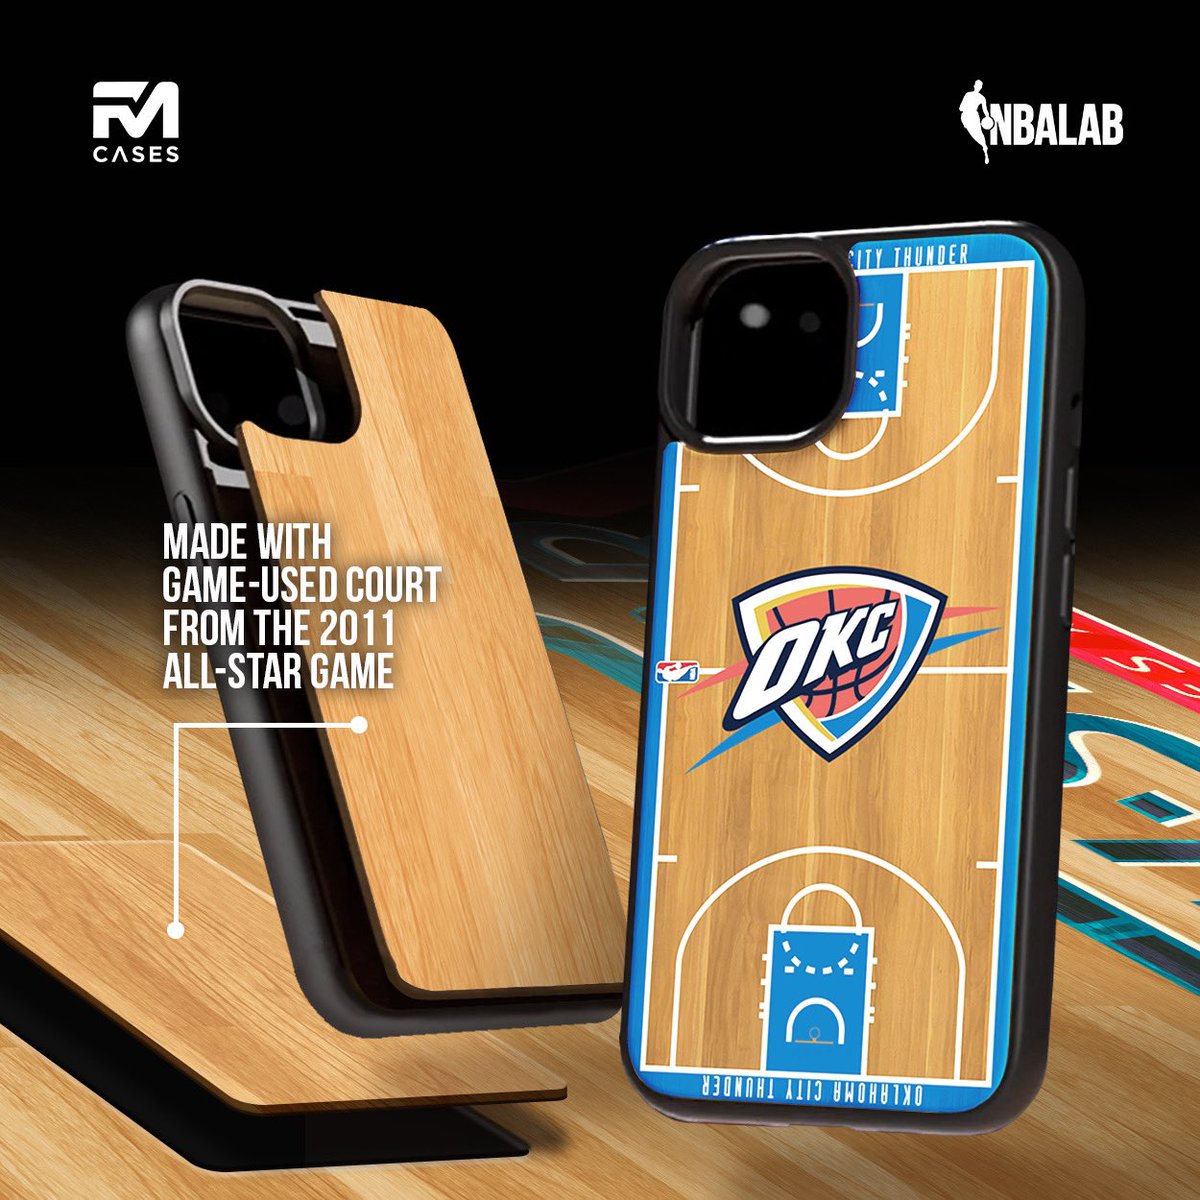 Authentic NBA Wood Cases 🏀 Made with game-used Court from the 2011 NBA All-Star game ⭐️ Certificate of Authenticity included 📄 Get yours: fmcases.com